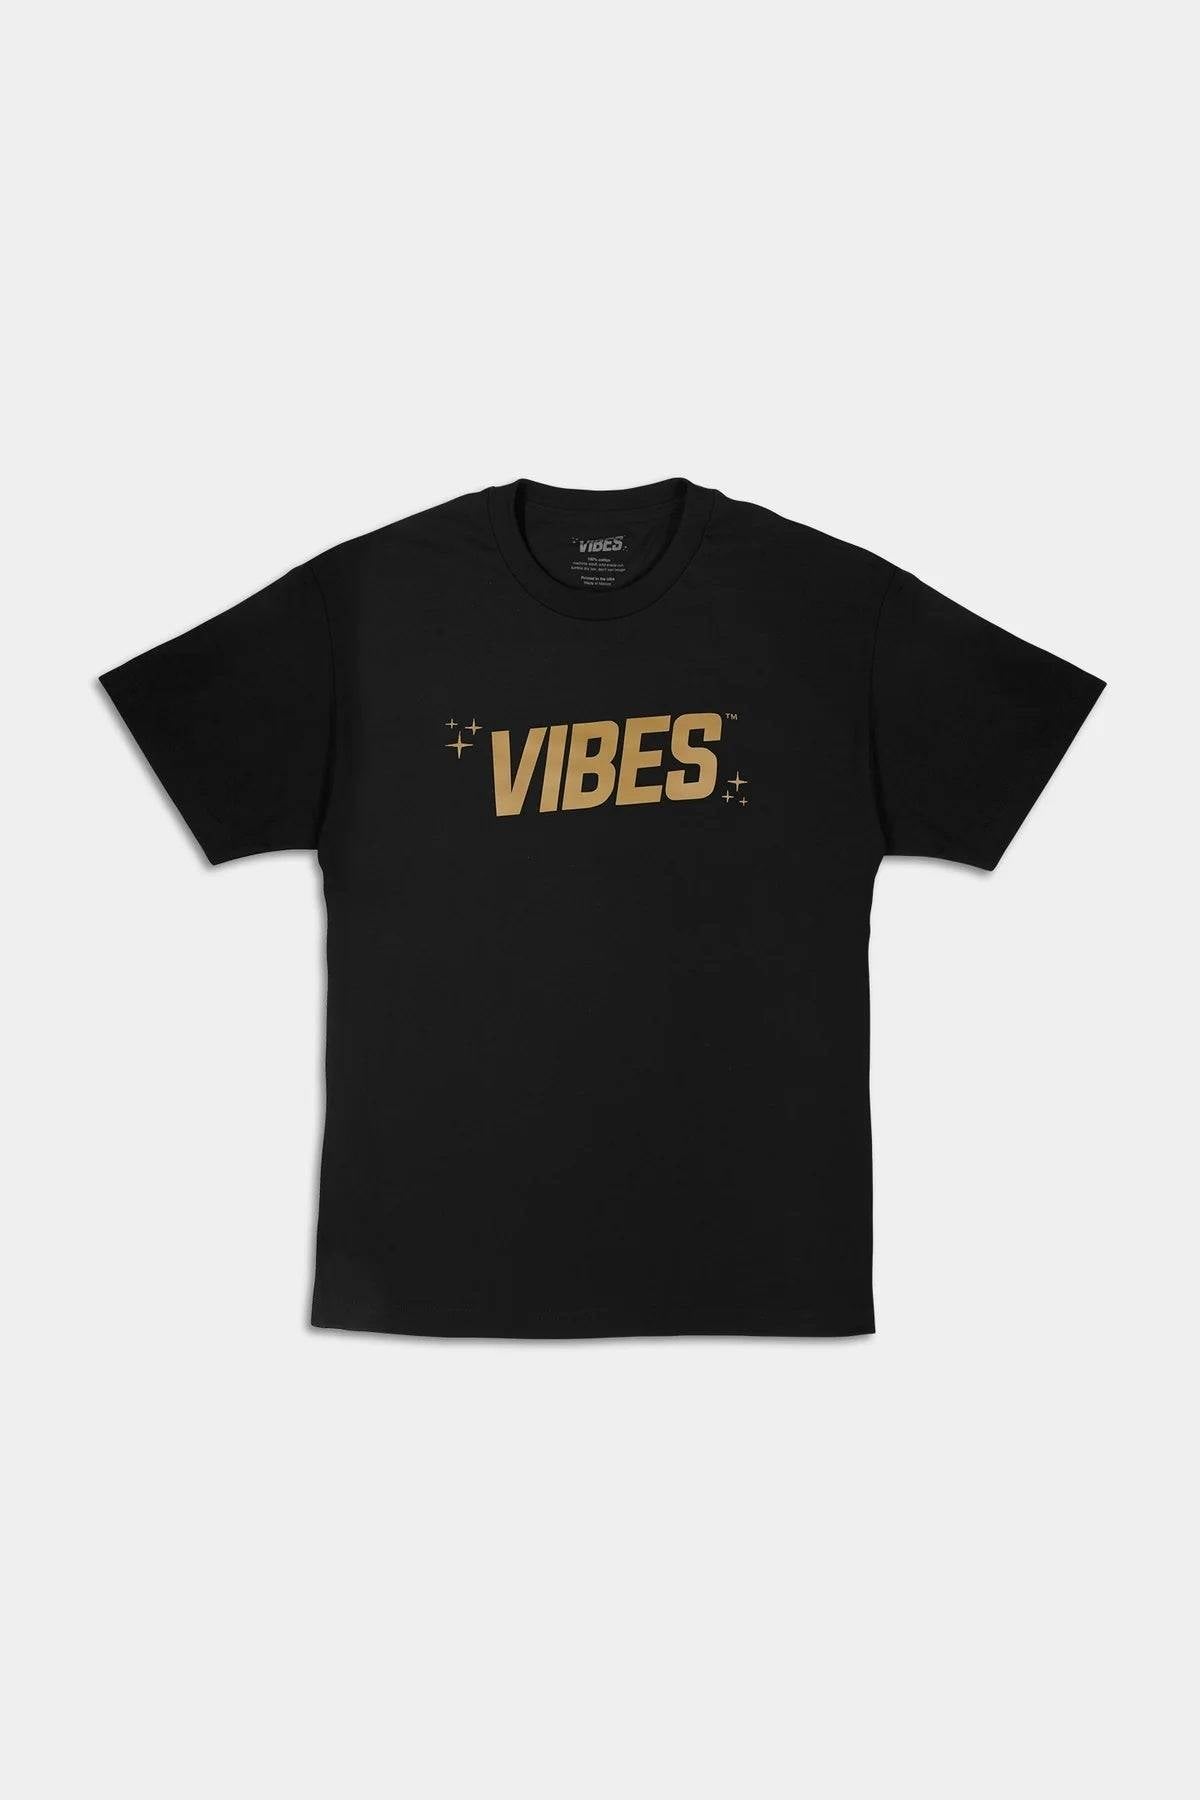 VIBES Black With Gold Logo T-Shirt Large